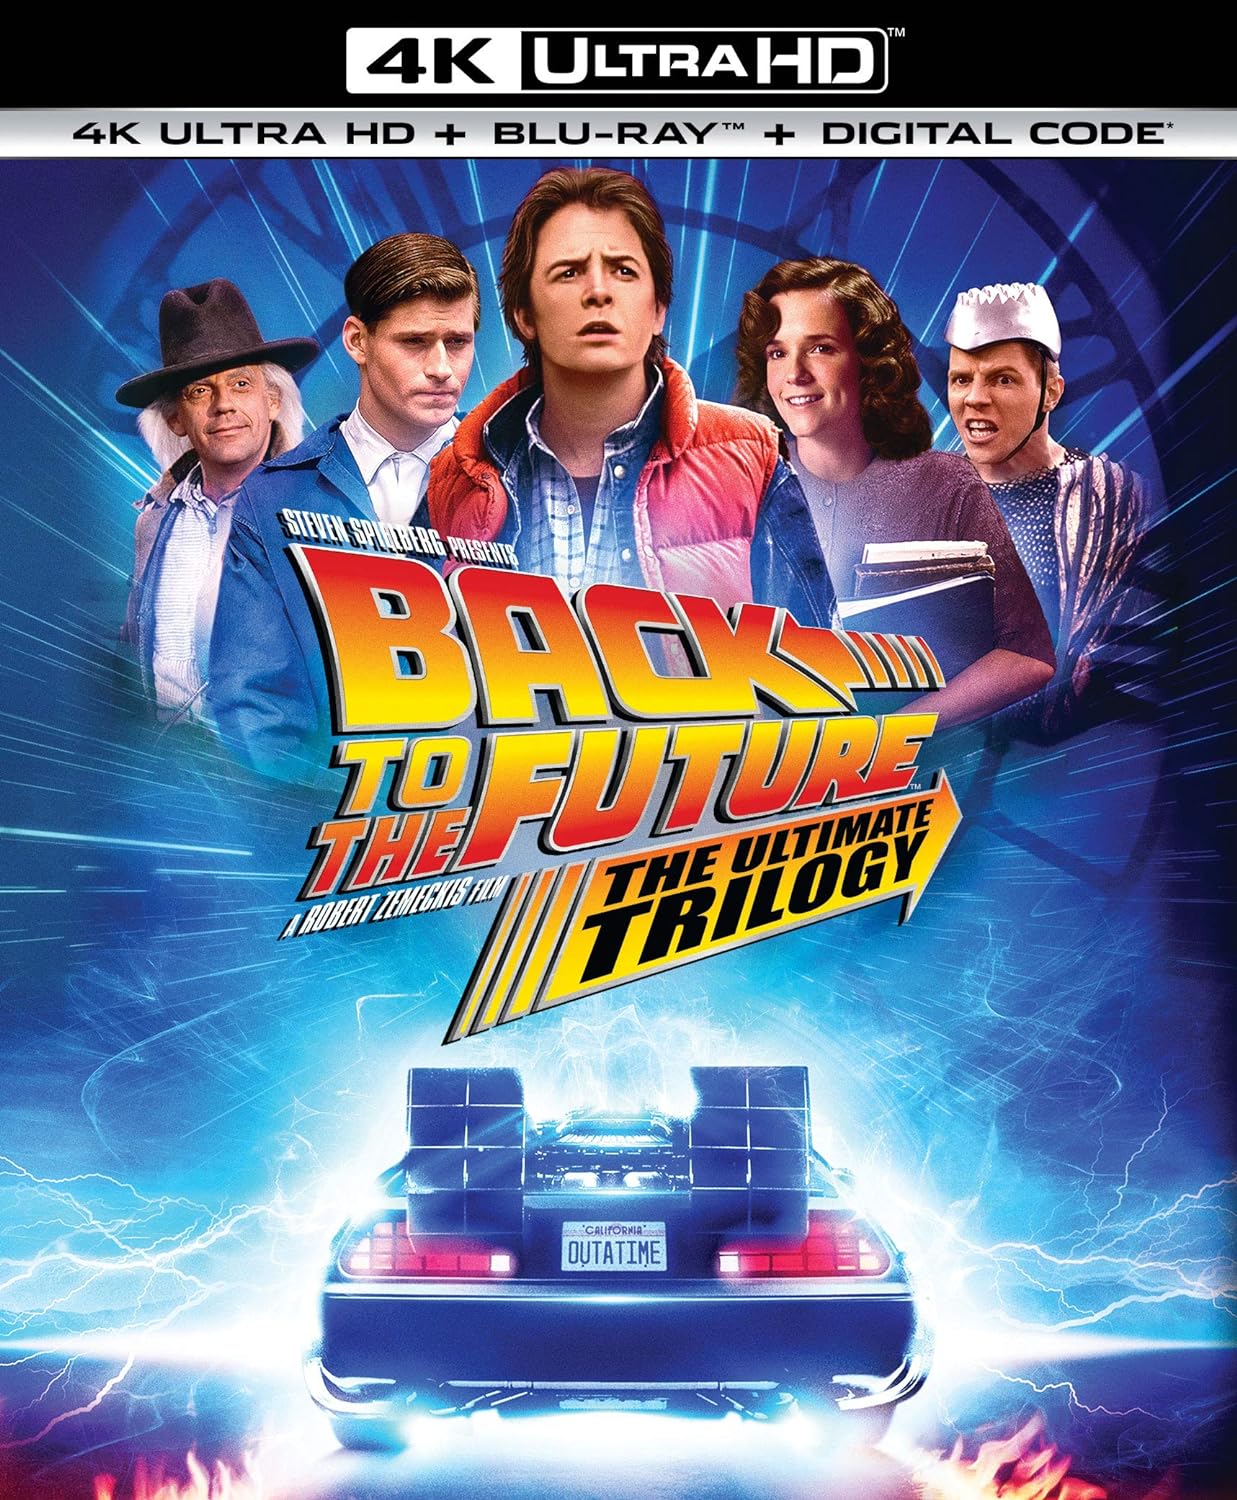 Back to the Future: The Ultimate Trilogy [4K Ultra HD + Bluray + Digital] for Prime members $24.99